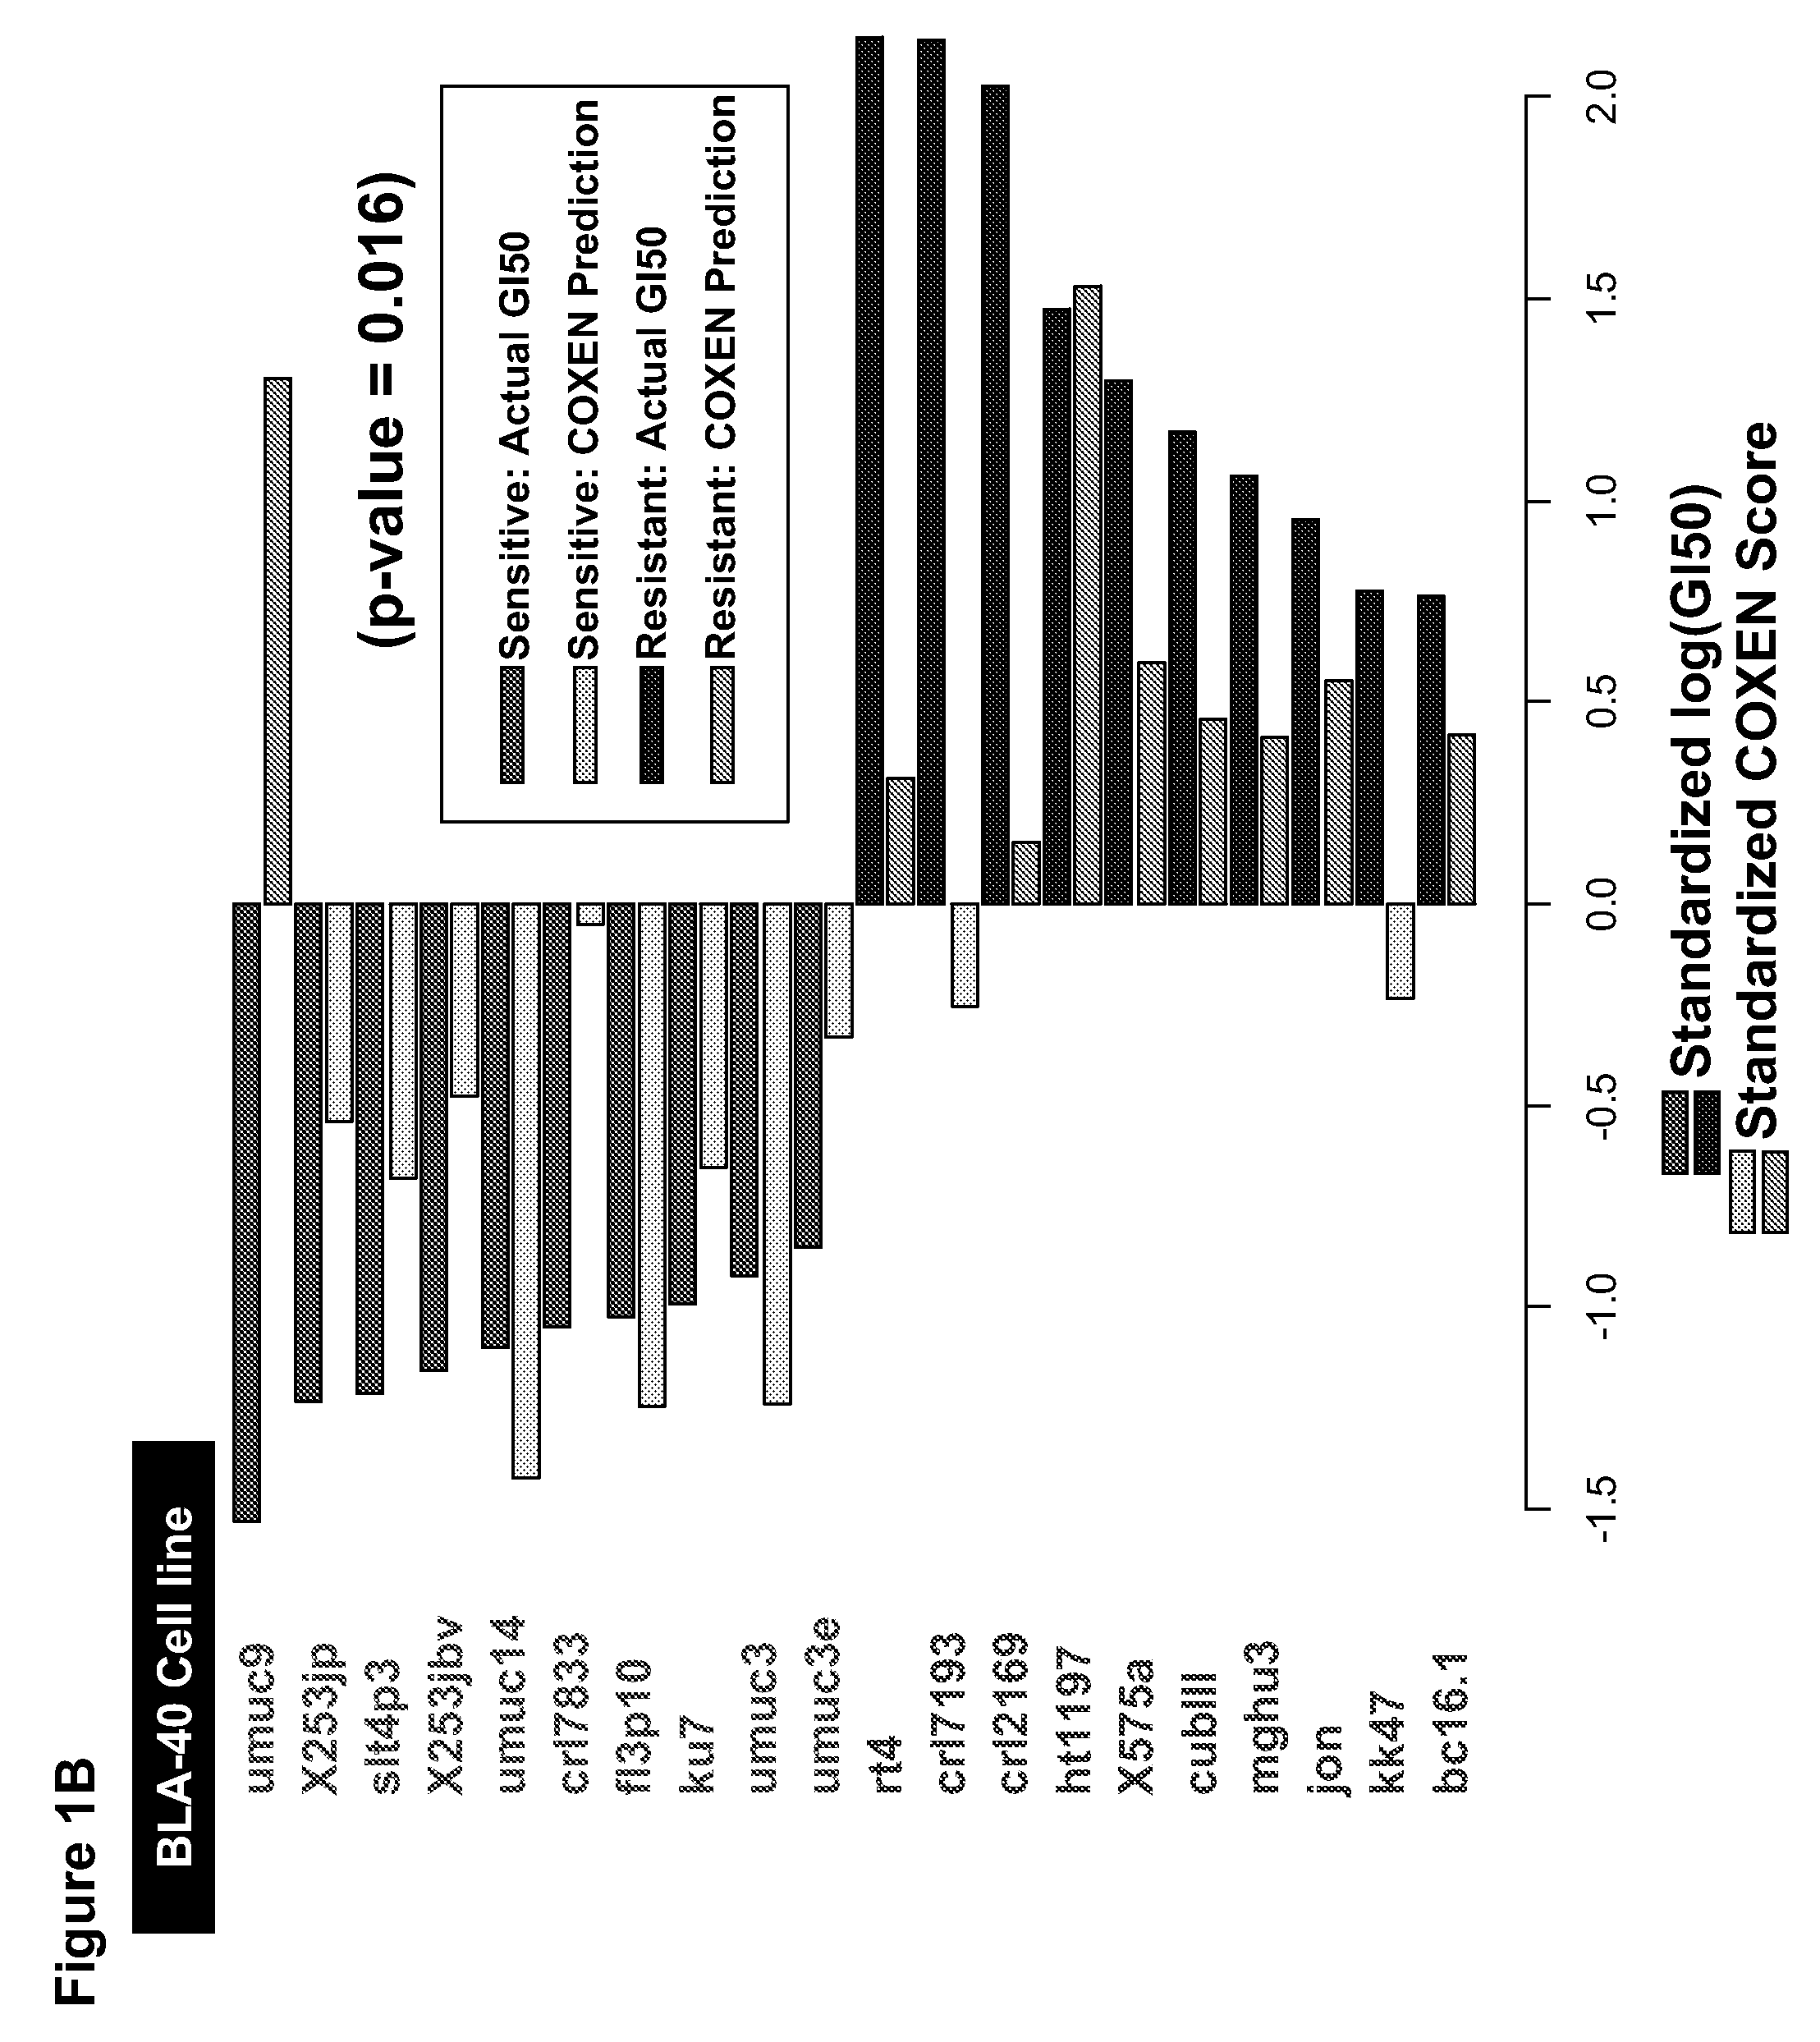 Prediction of an agent's or agents' activity across different cells and tissue types